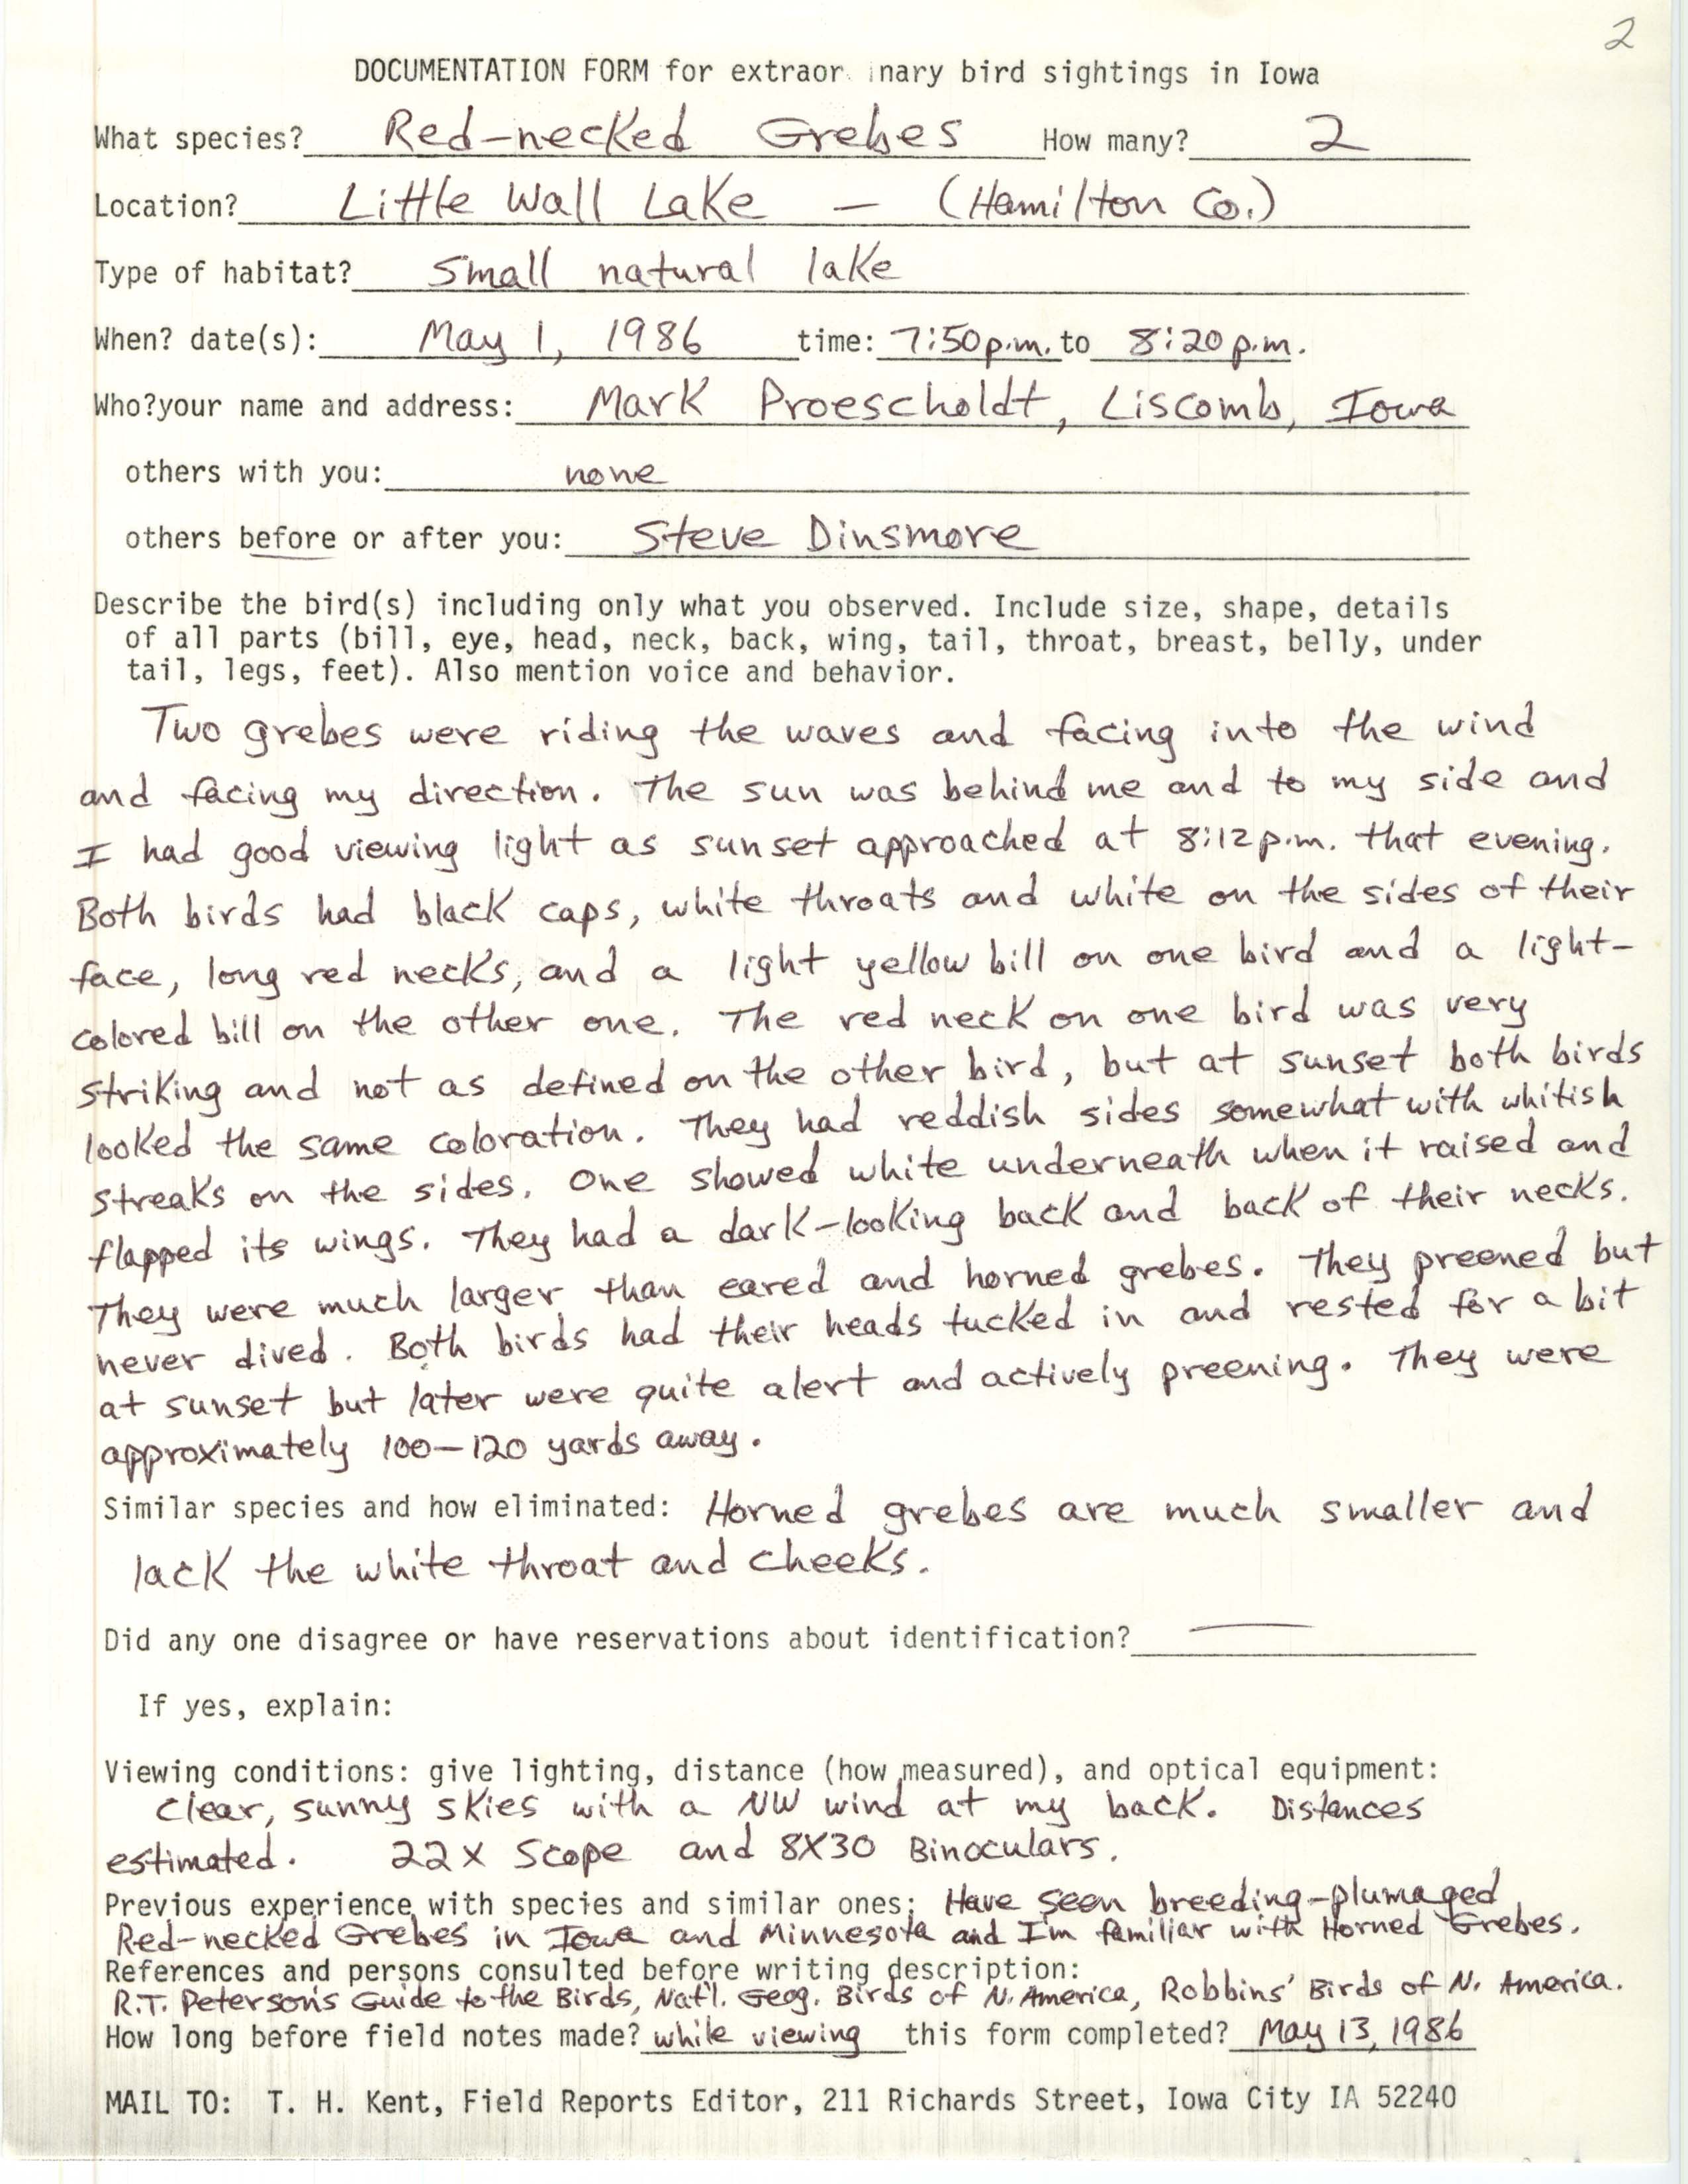 Rare bird documentation form for Red-necked Grebe at Little Wall Lake, 1986